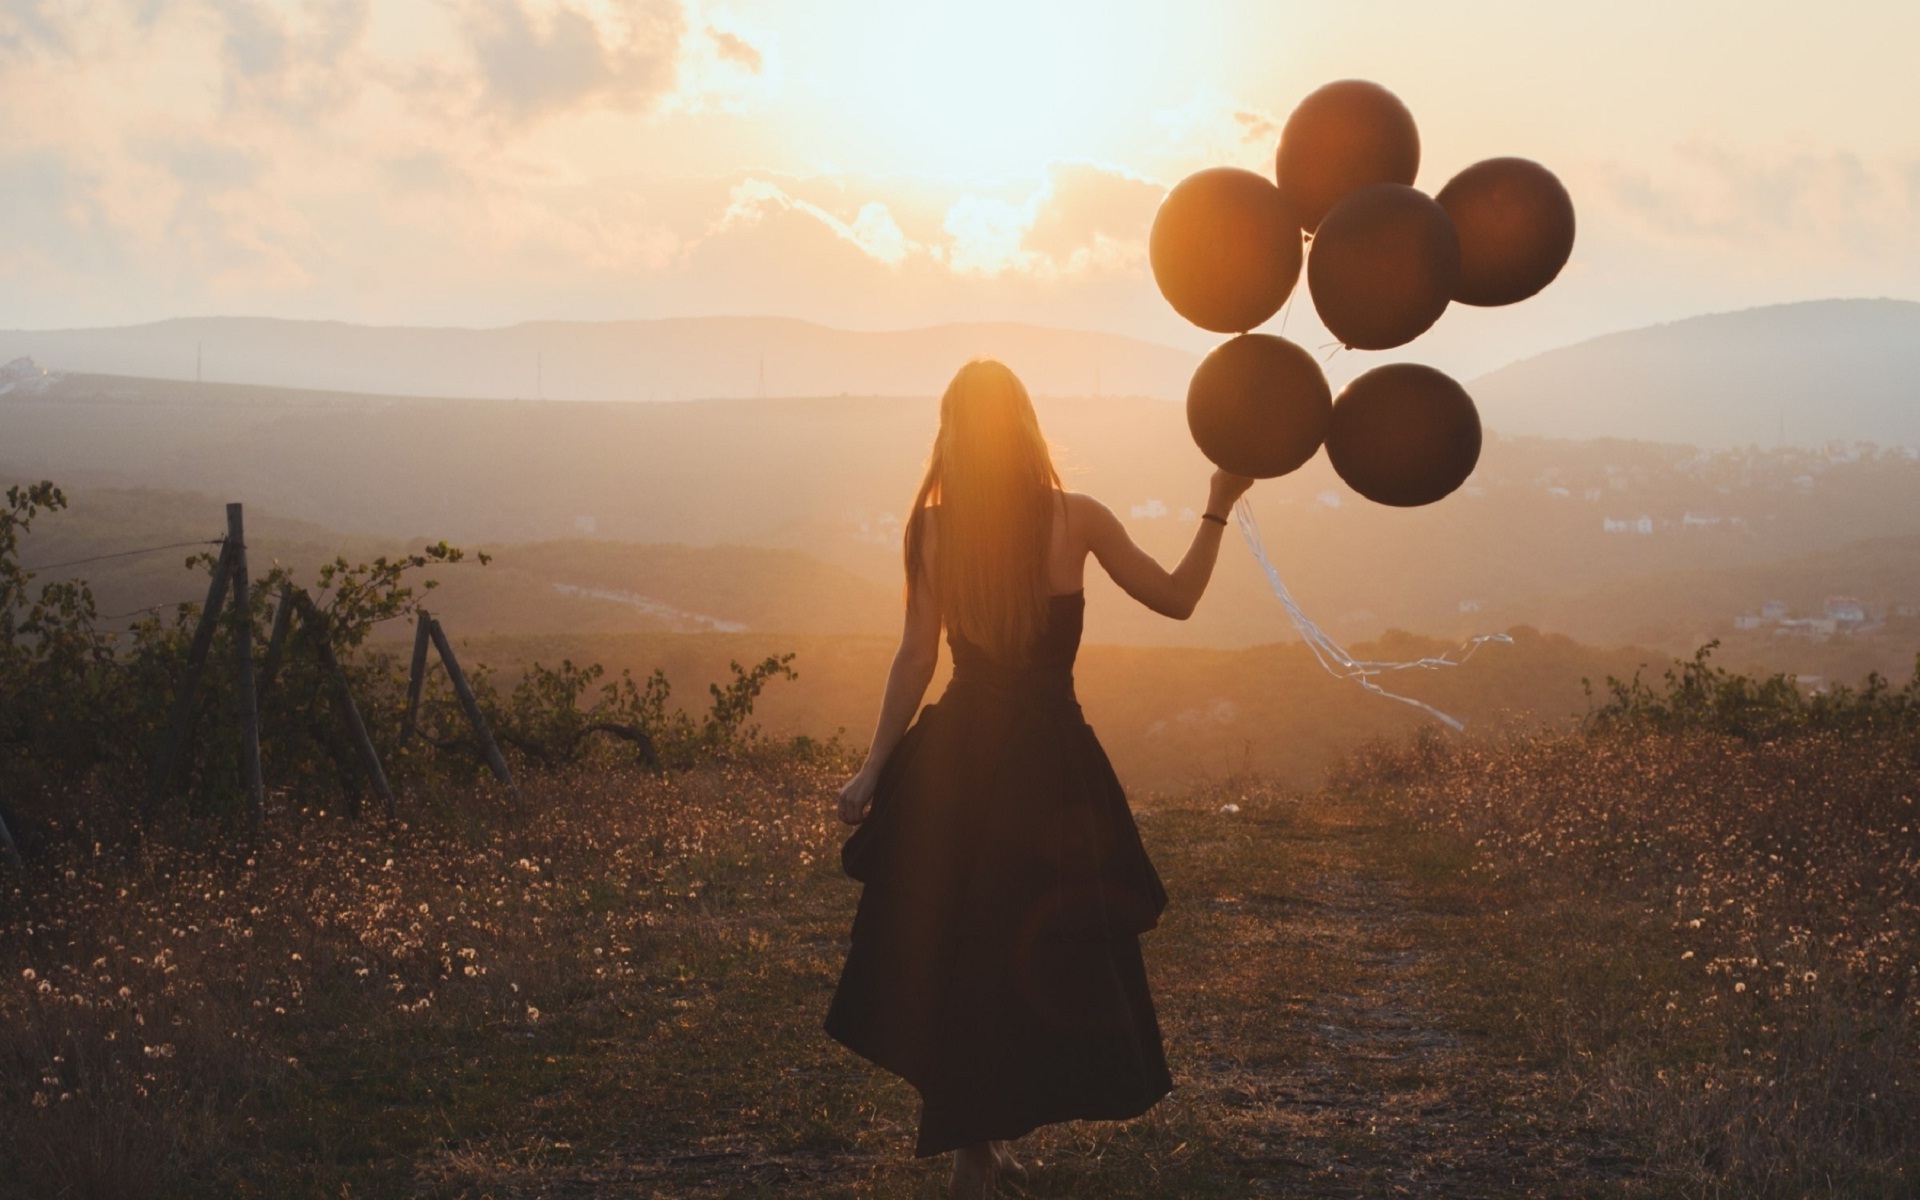 Alone girl with balloons lonely miss you | HD Wallpapers Rocks